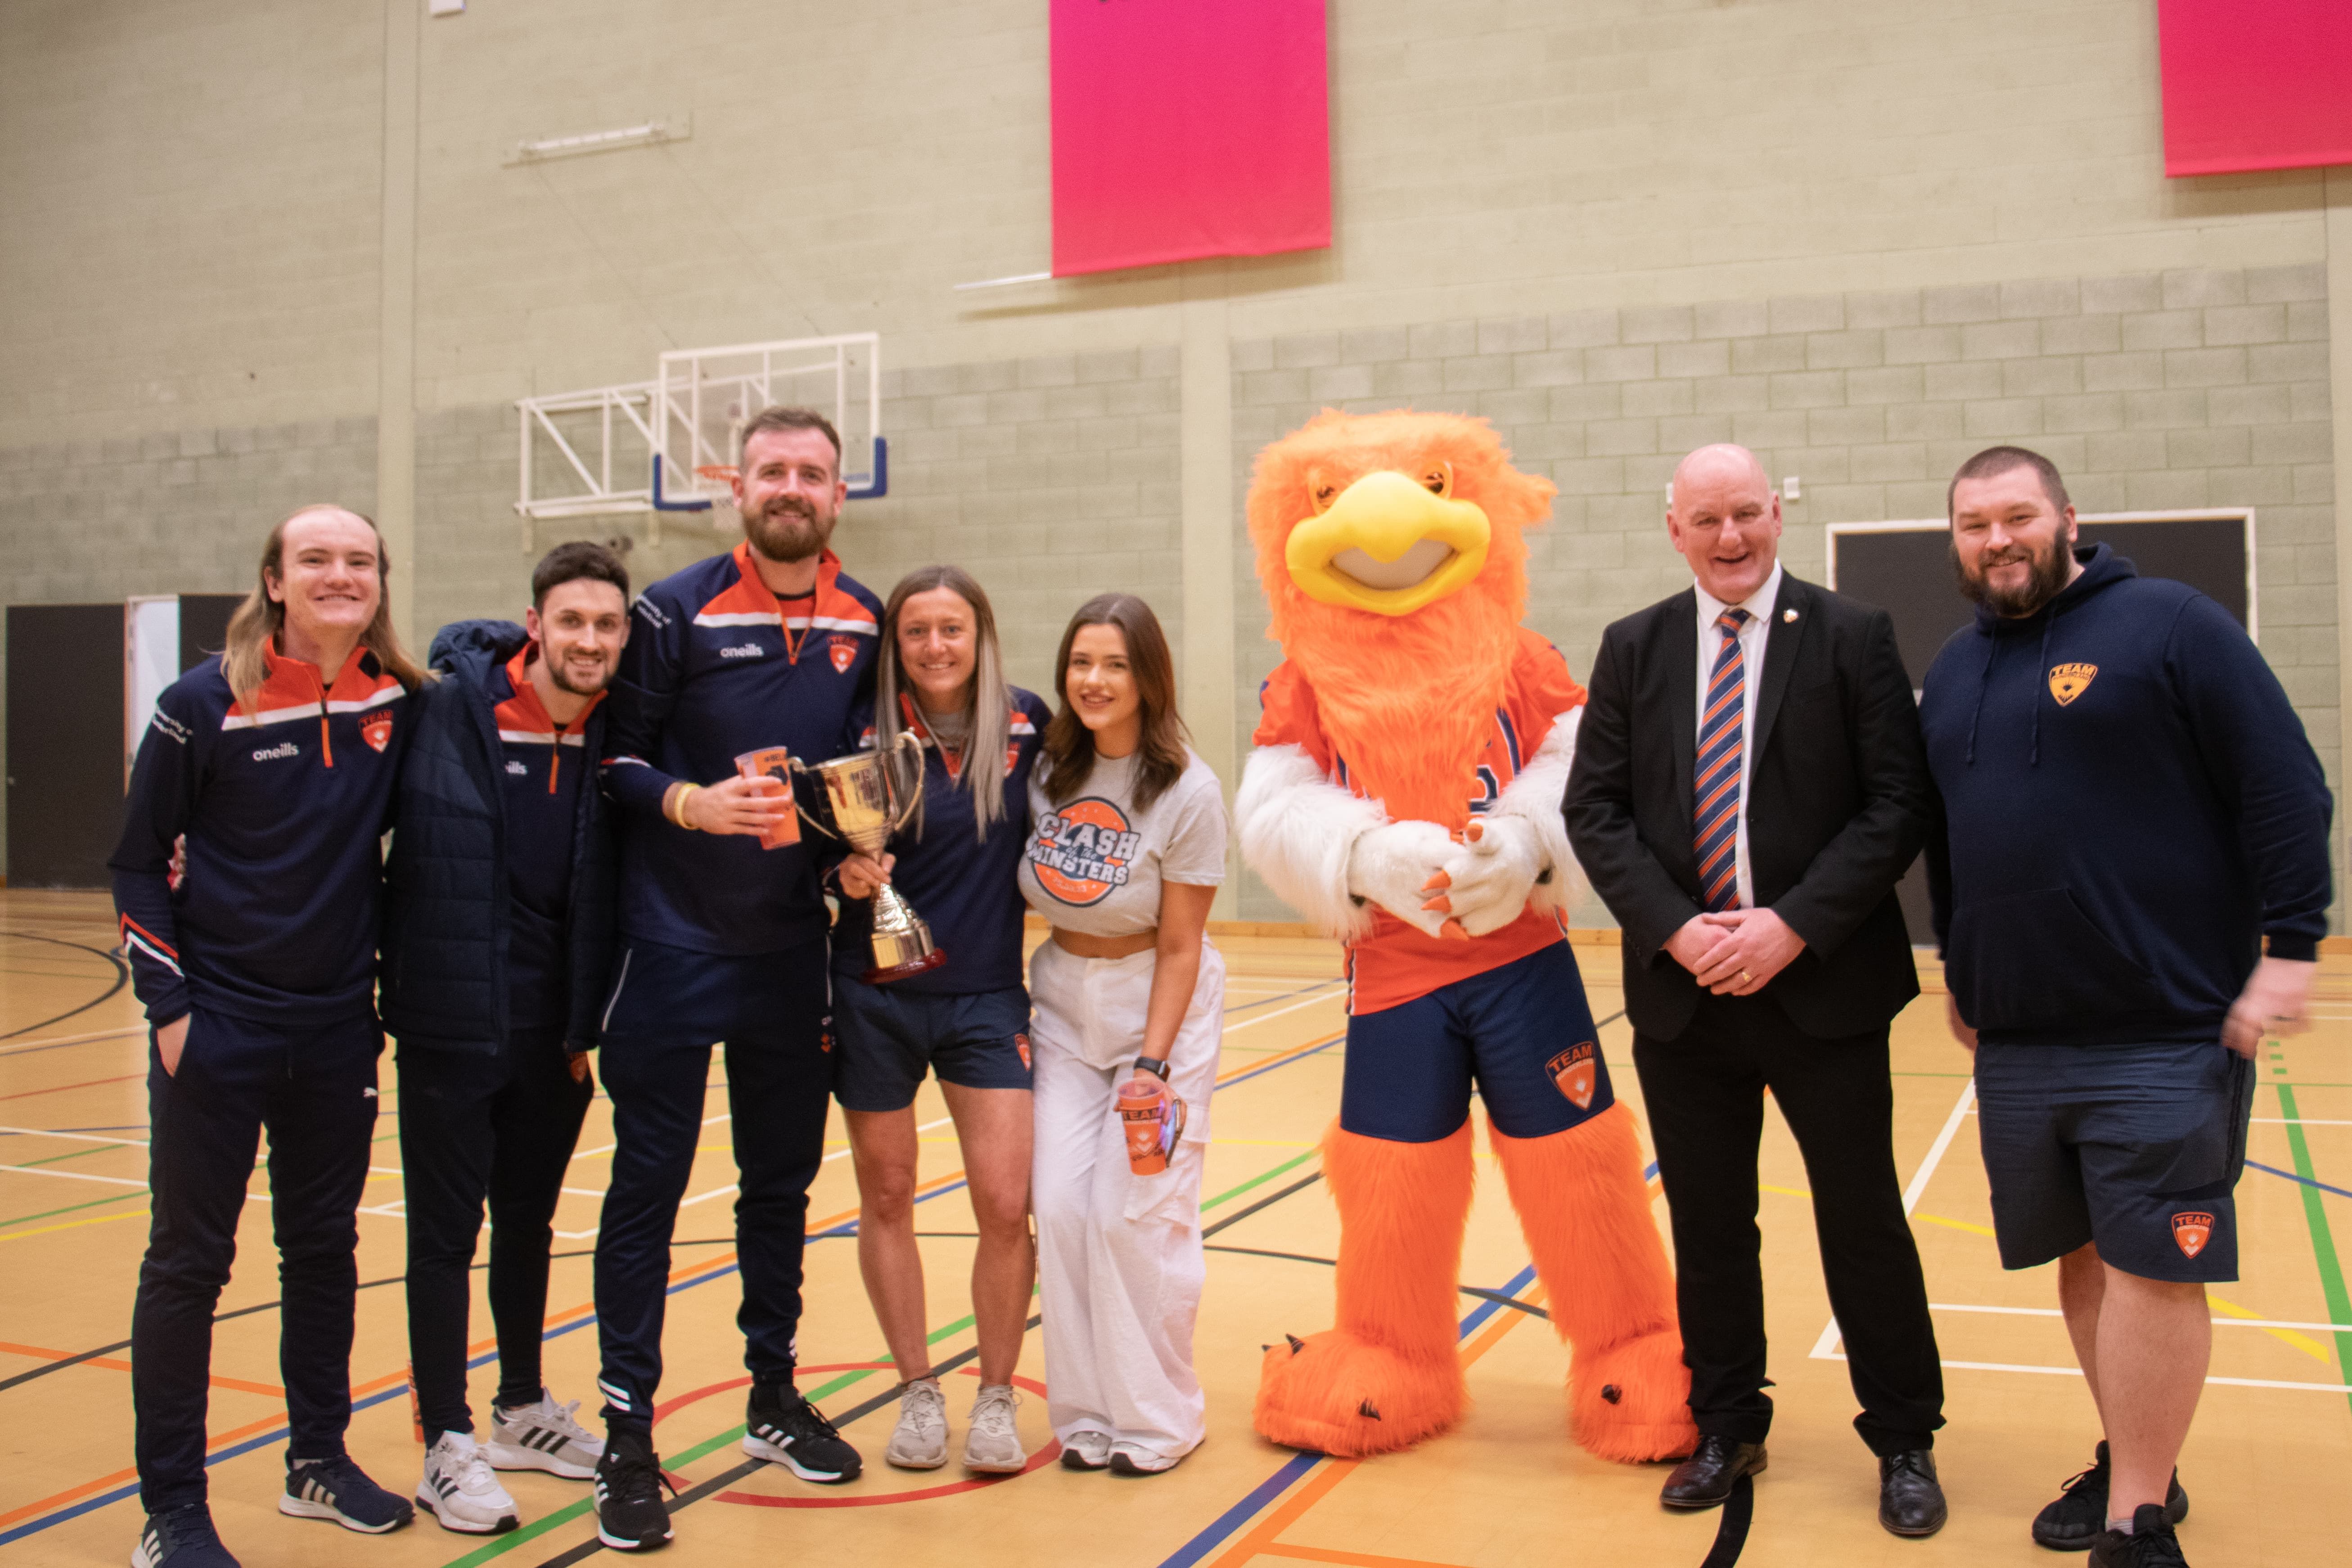 Team Sunderland standing in a line in the sports hall with the mascot (a griffin) and Sir David Bell, smiling